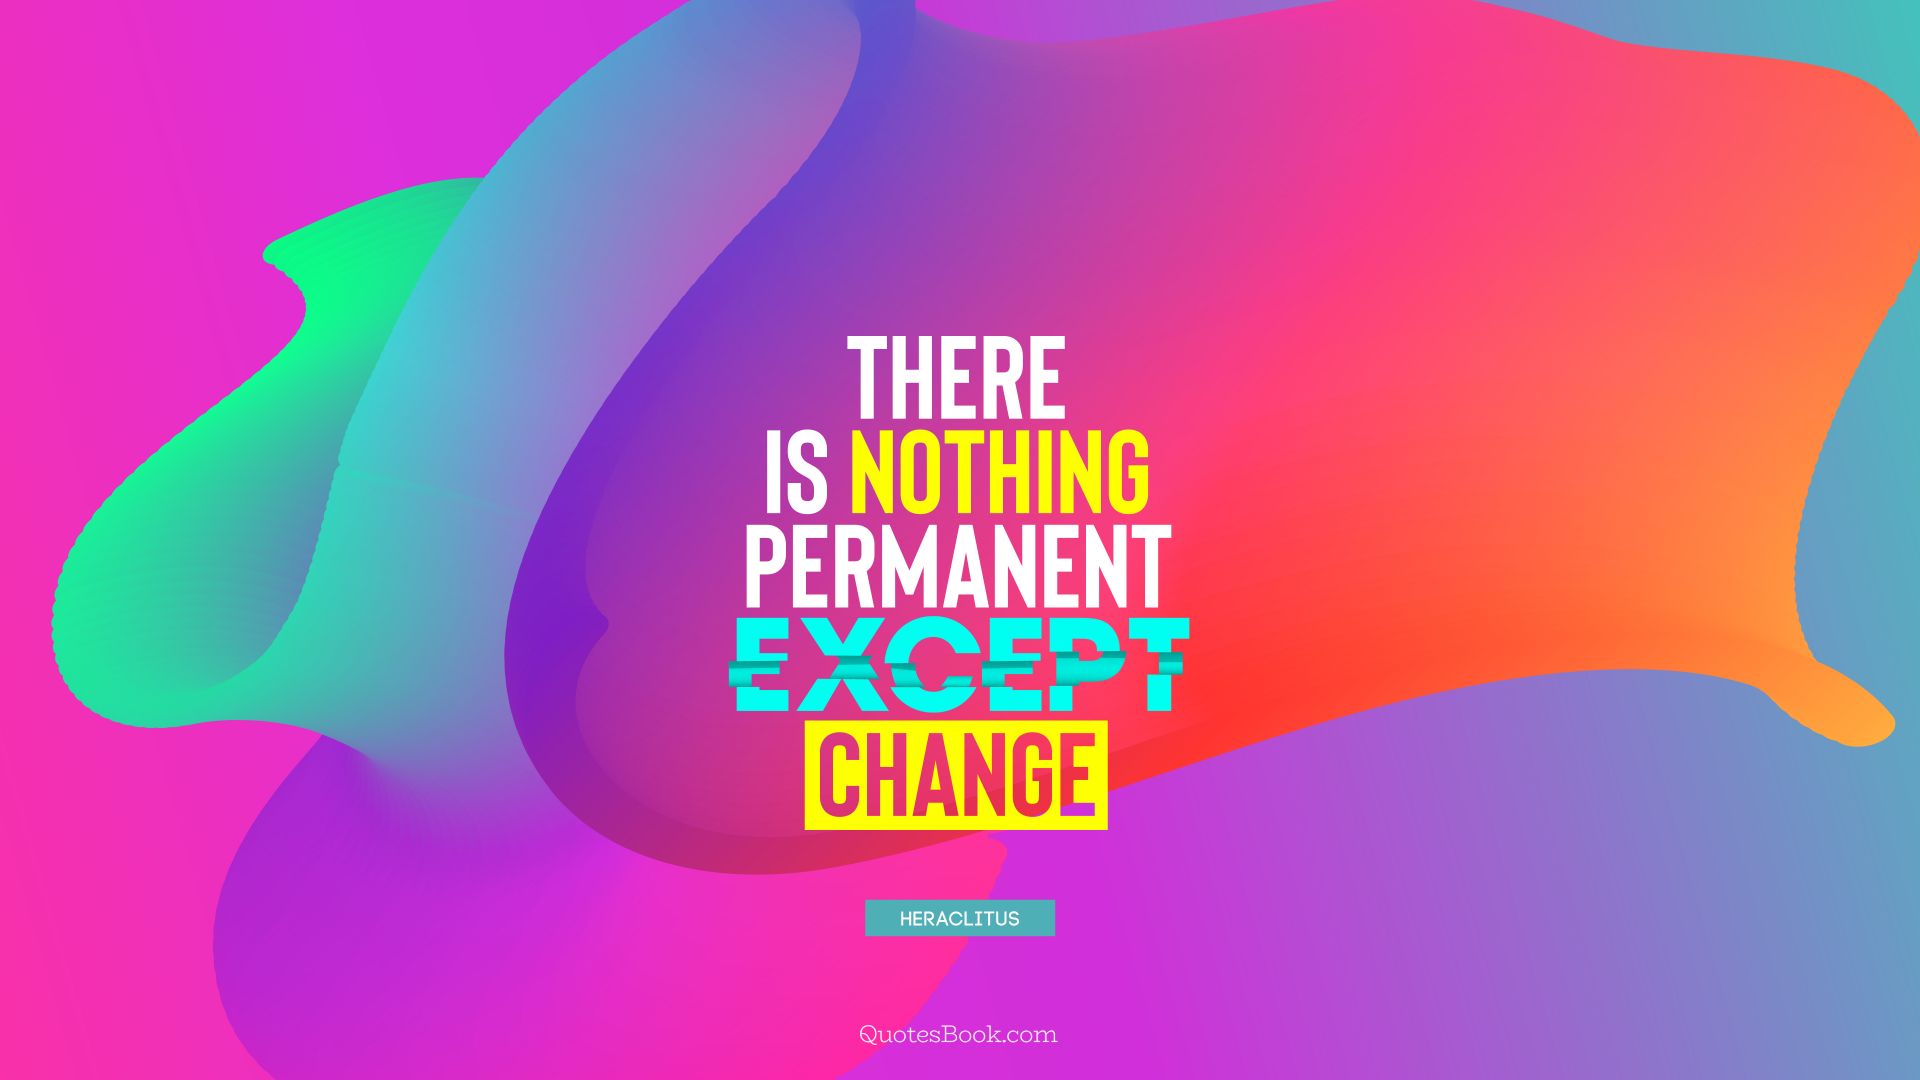 There is nothing permanent except change. - Quote by Heraclitus